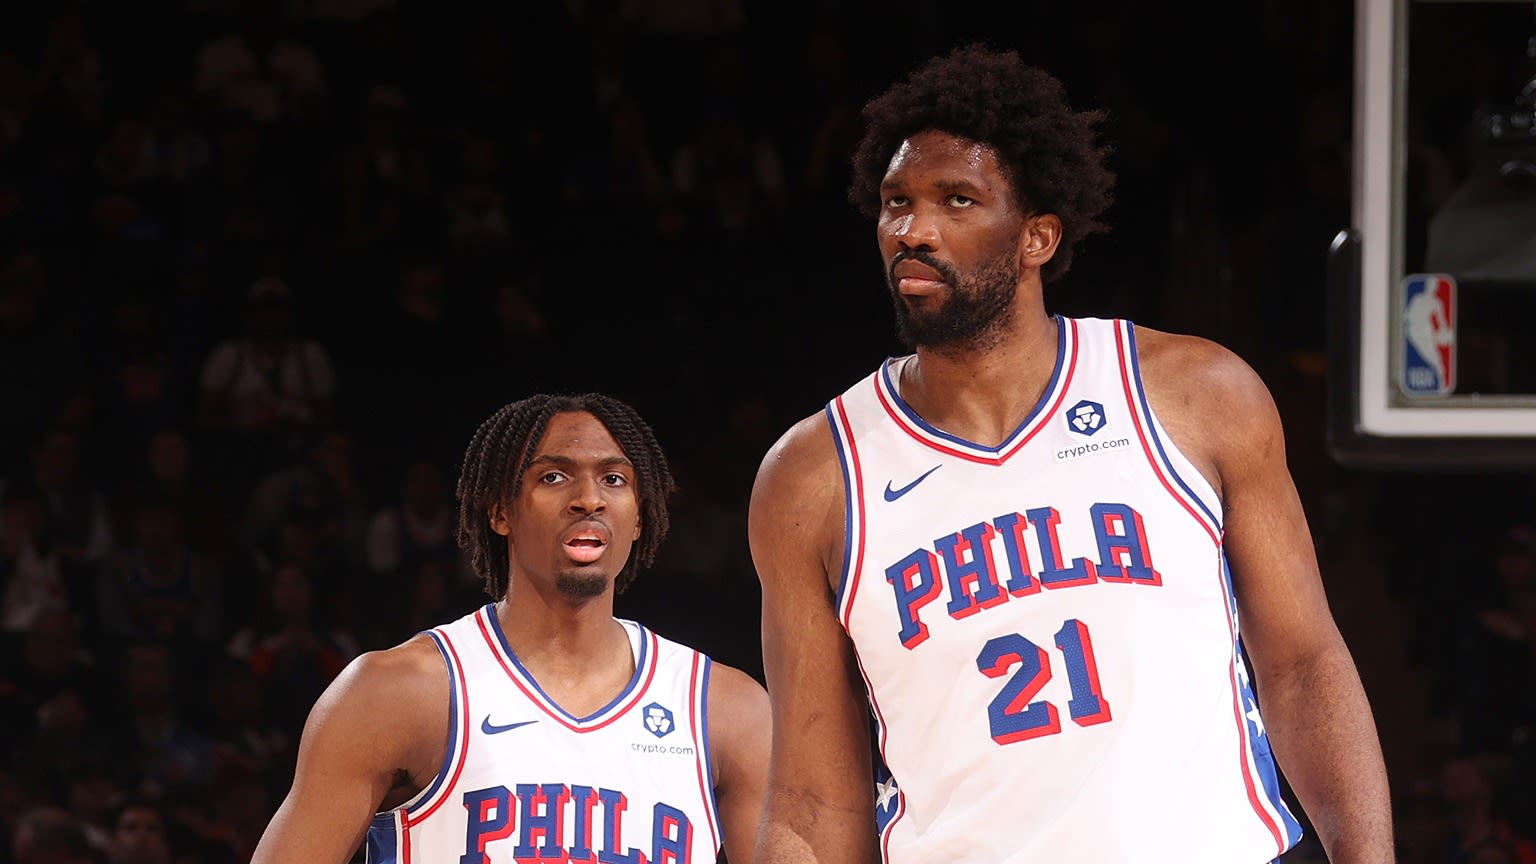 With Finals underway, answers coming soon in Sixers' offseason of possibilities